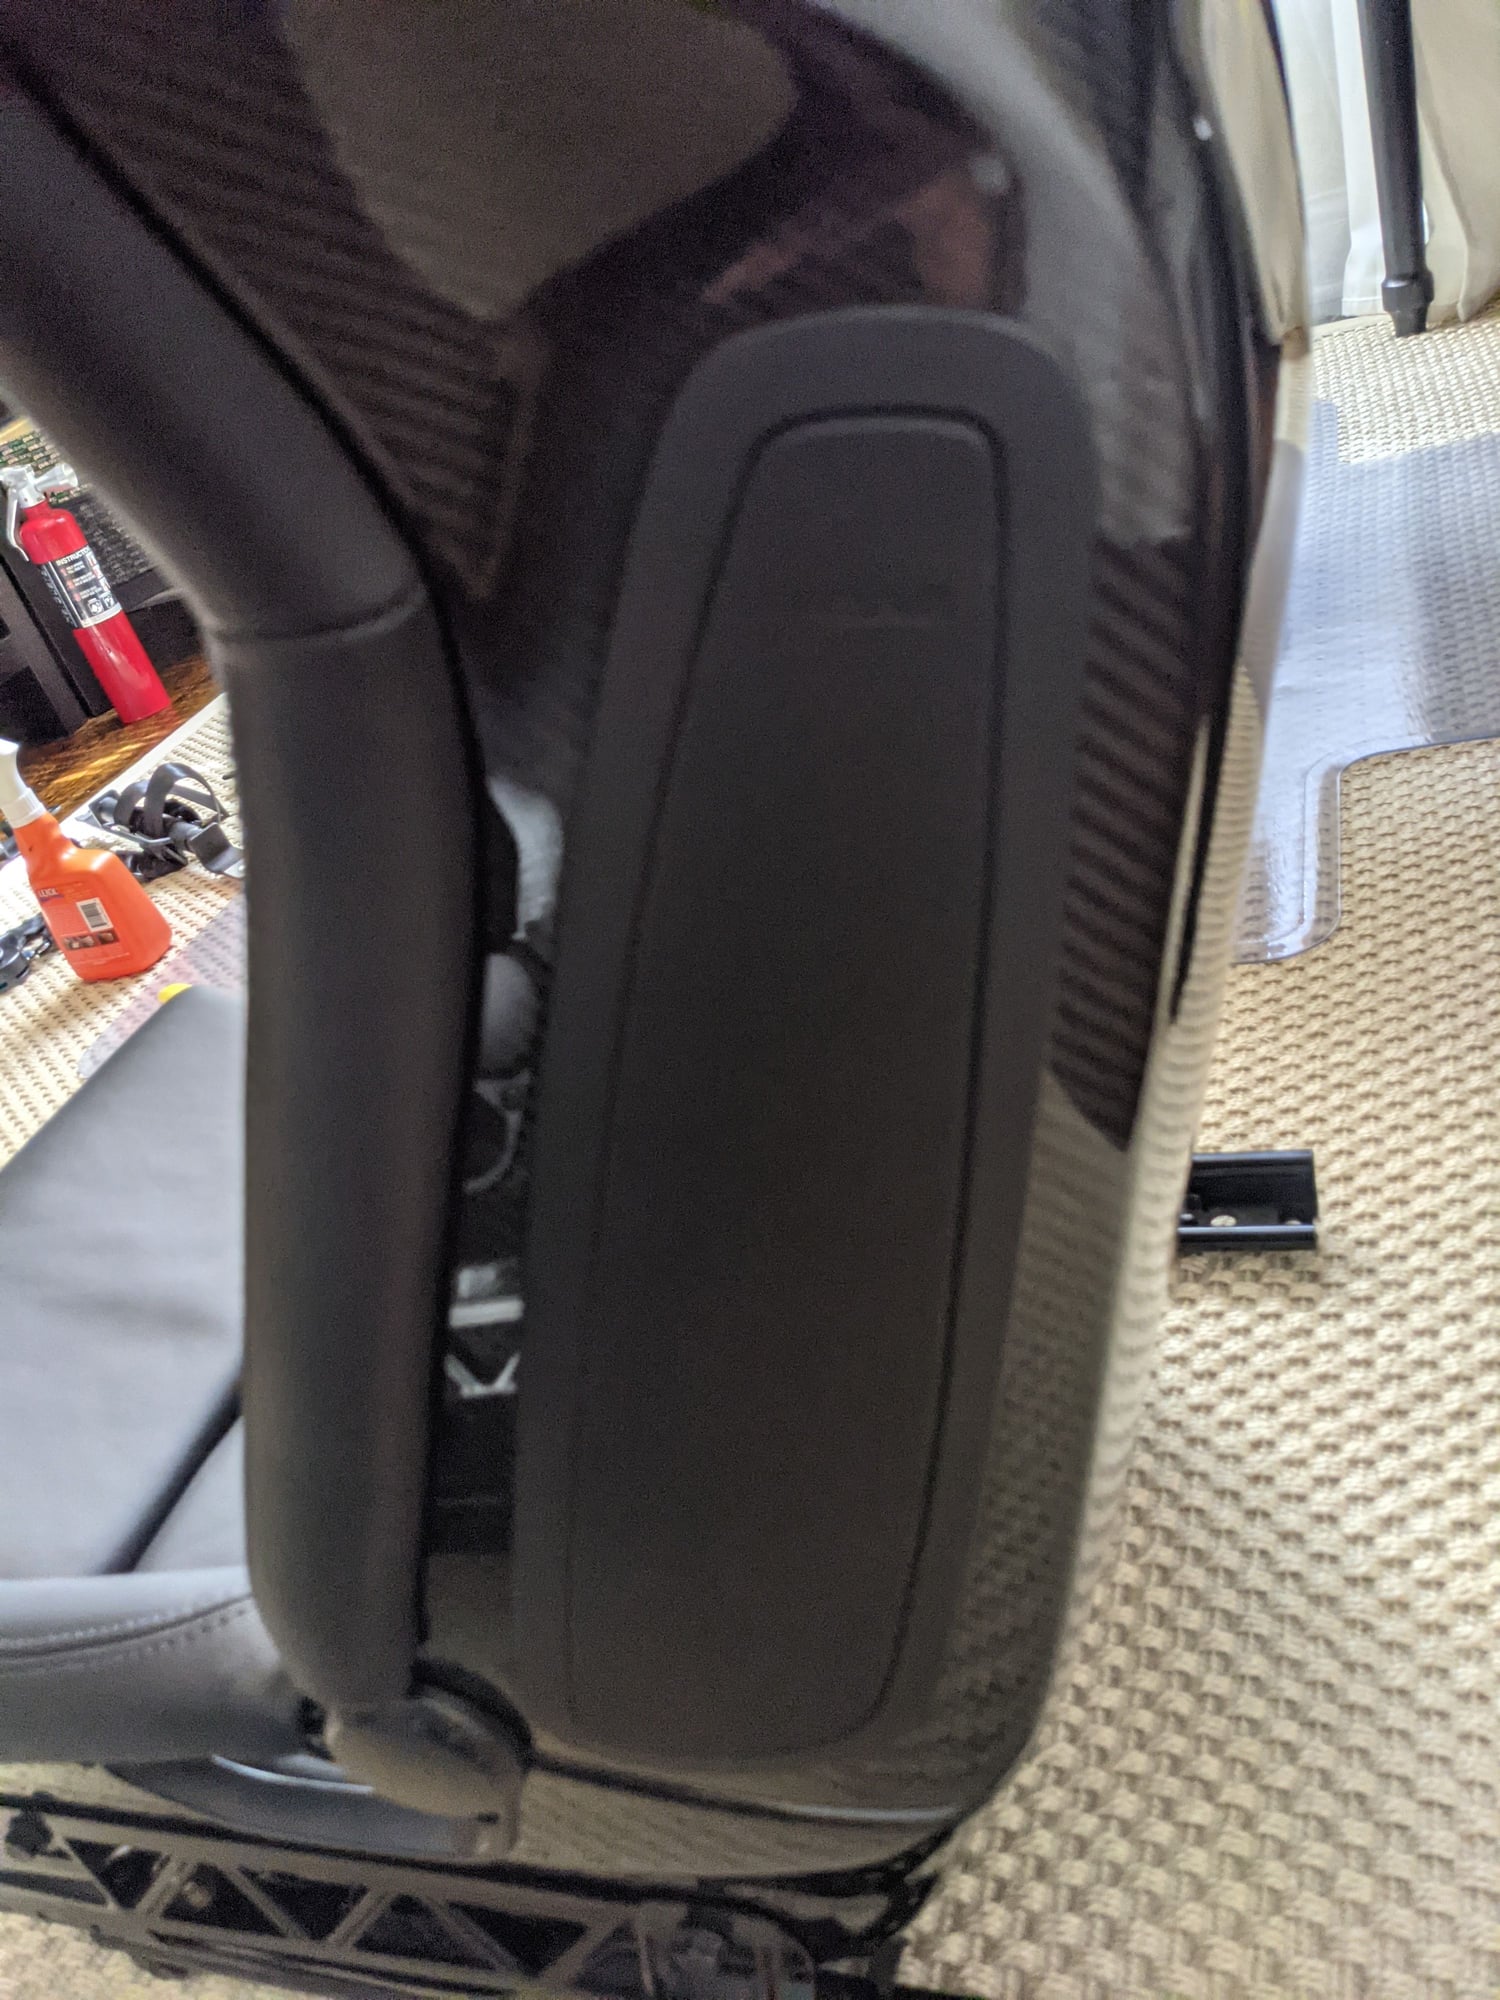 Interior/Upholstery - GT2/ GT3 Lightweight Bucket seats - Used - 2007 to 2011 Porsche 911 - Plano, TX 75024, United States